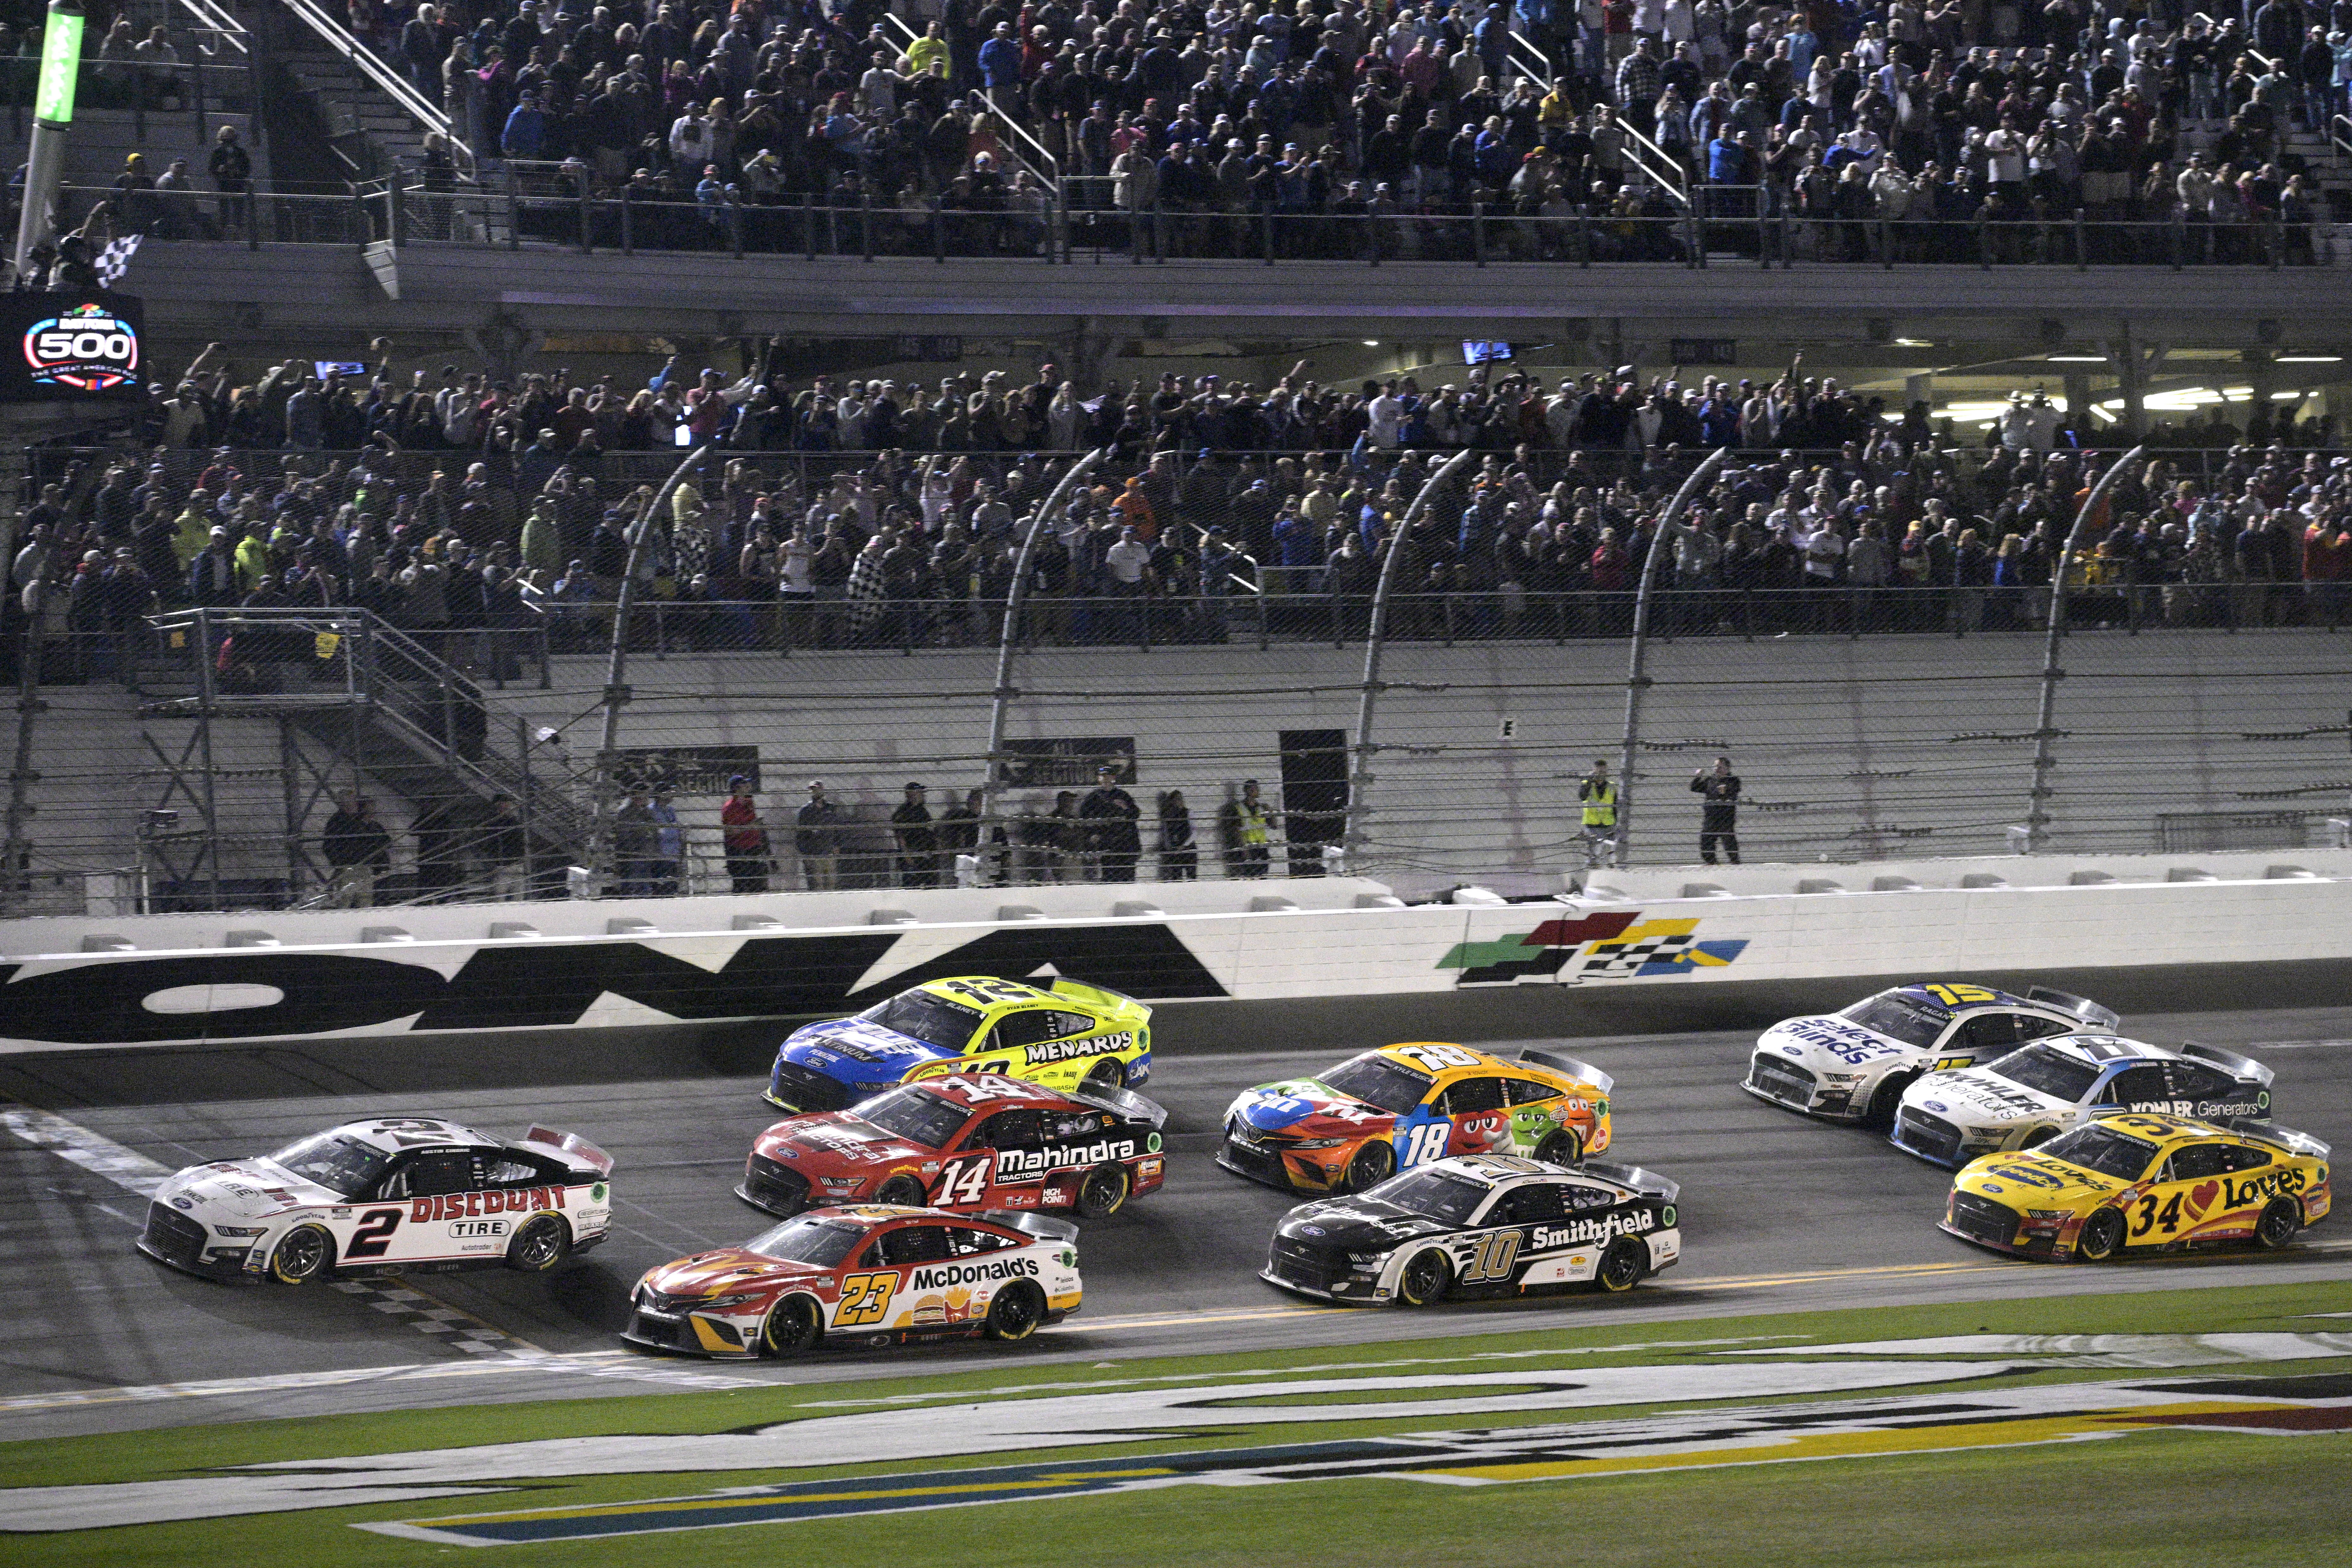 How to Watch the Daytona 500 - NASCAR Cup Series Channel, Stream, Preview 